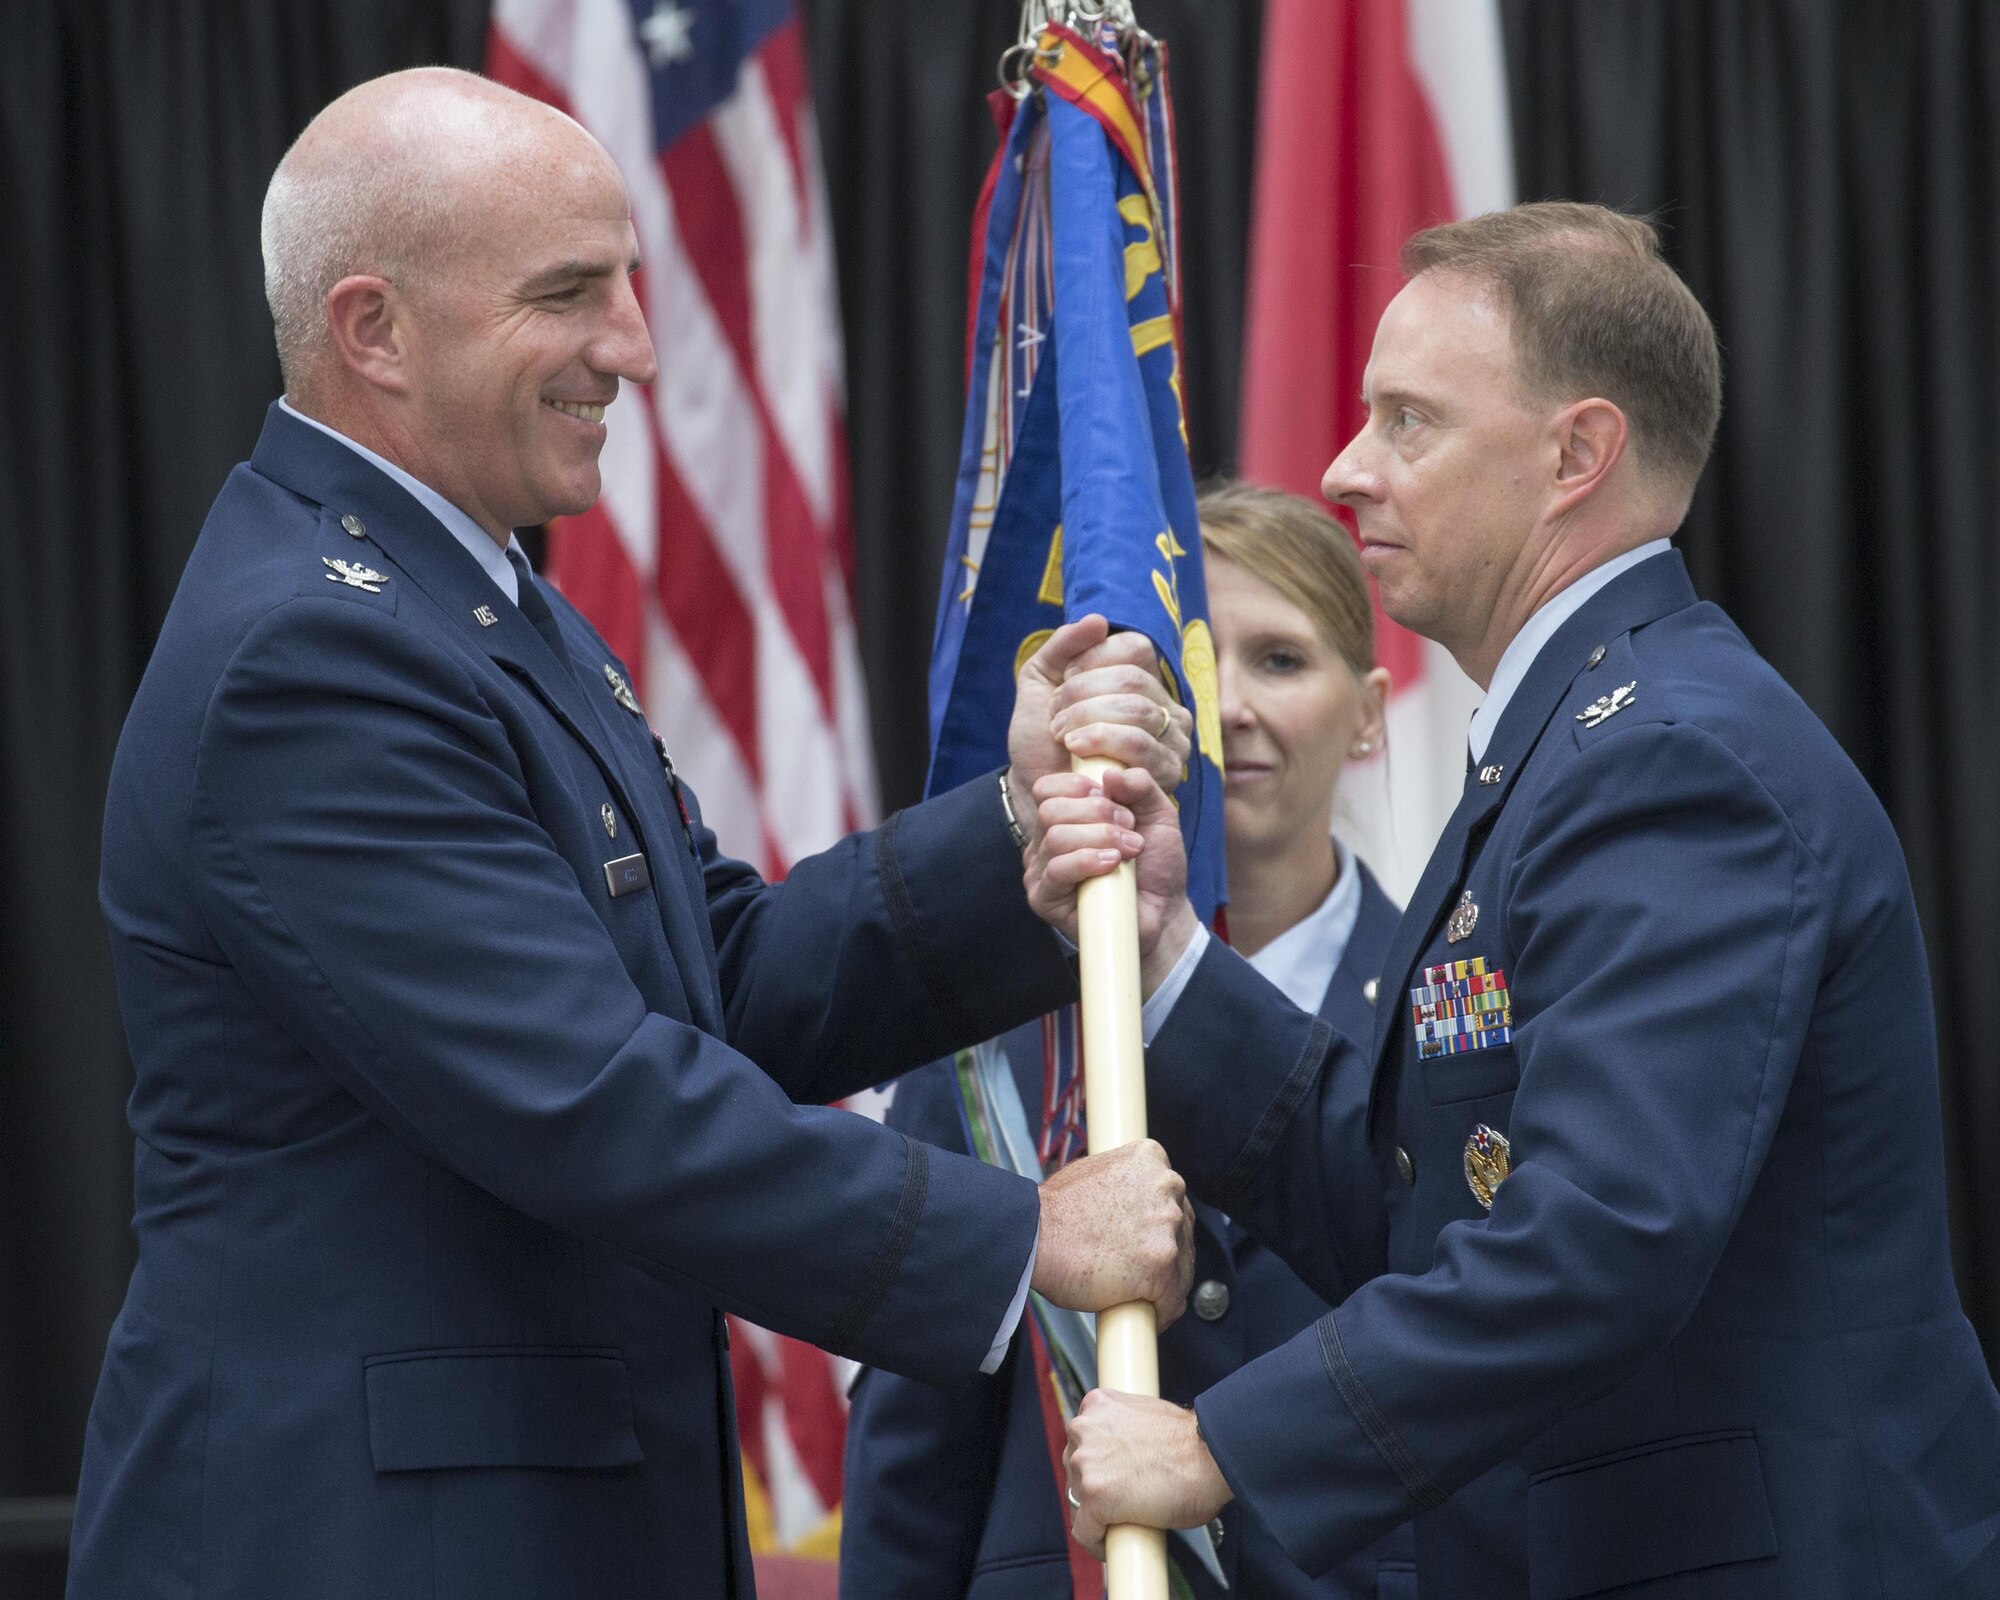 Col. John Winkler, right, incoming 374th Mission Support Group commander, receives the guidon from Col. Kenneth Moss, left, 374th Airlift Wing commander, during a change of command ceremony at Yokota Air Base, Japan, Aug. 8, 2016. Prior to taking command, Winkler was the deputy commander for the 319th Mission Support Group, Grand Forks Air Force Base, North Dakota. The change of command ceremony is a symbolic gesture to officially transfer the responsibility between the outgoing and incoming commander. (U.S. Air Force photo by Yasuo Osakabe/Released) 